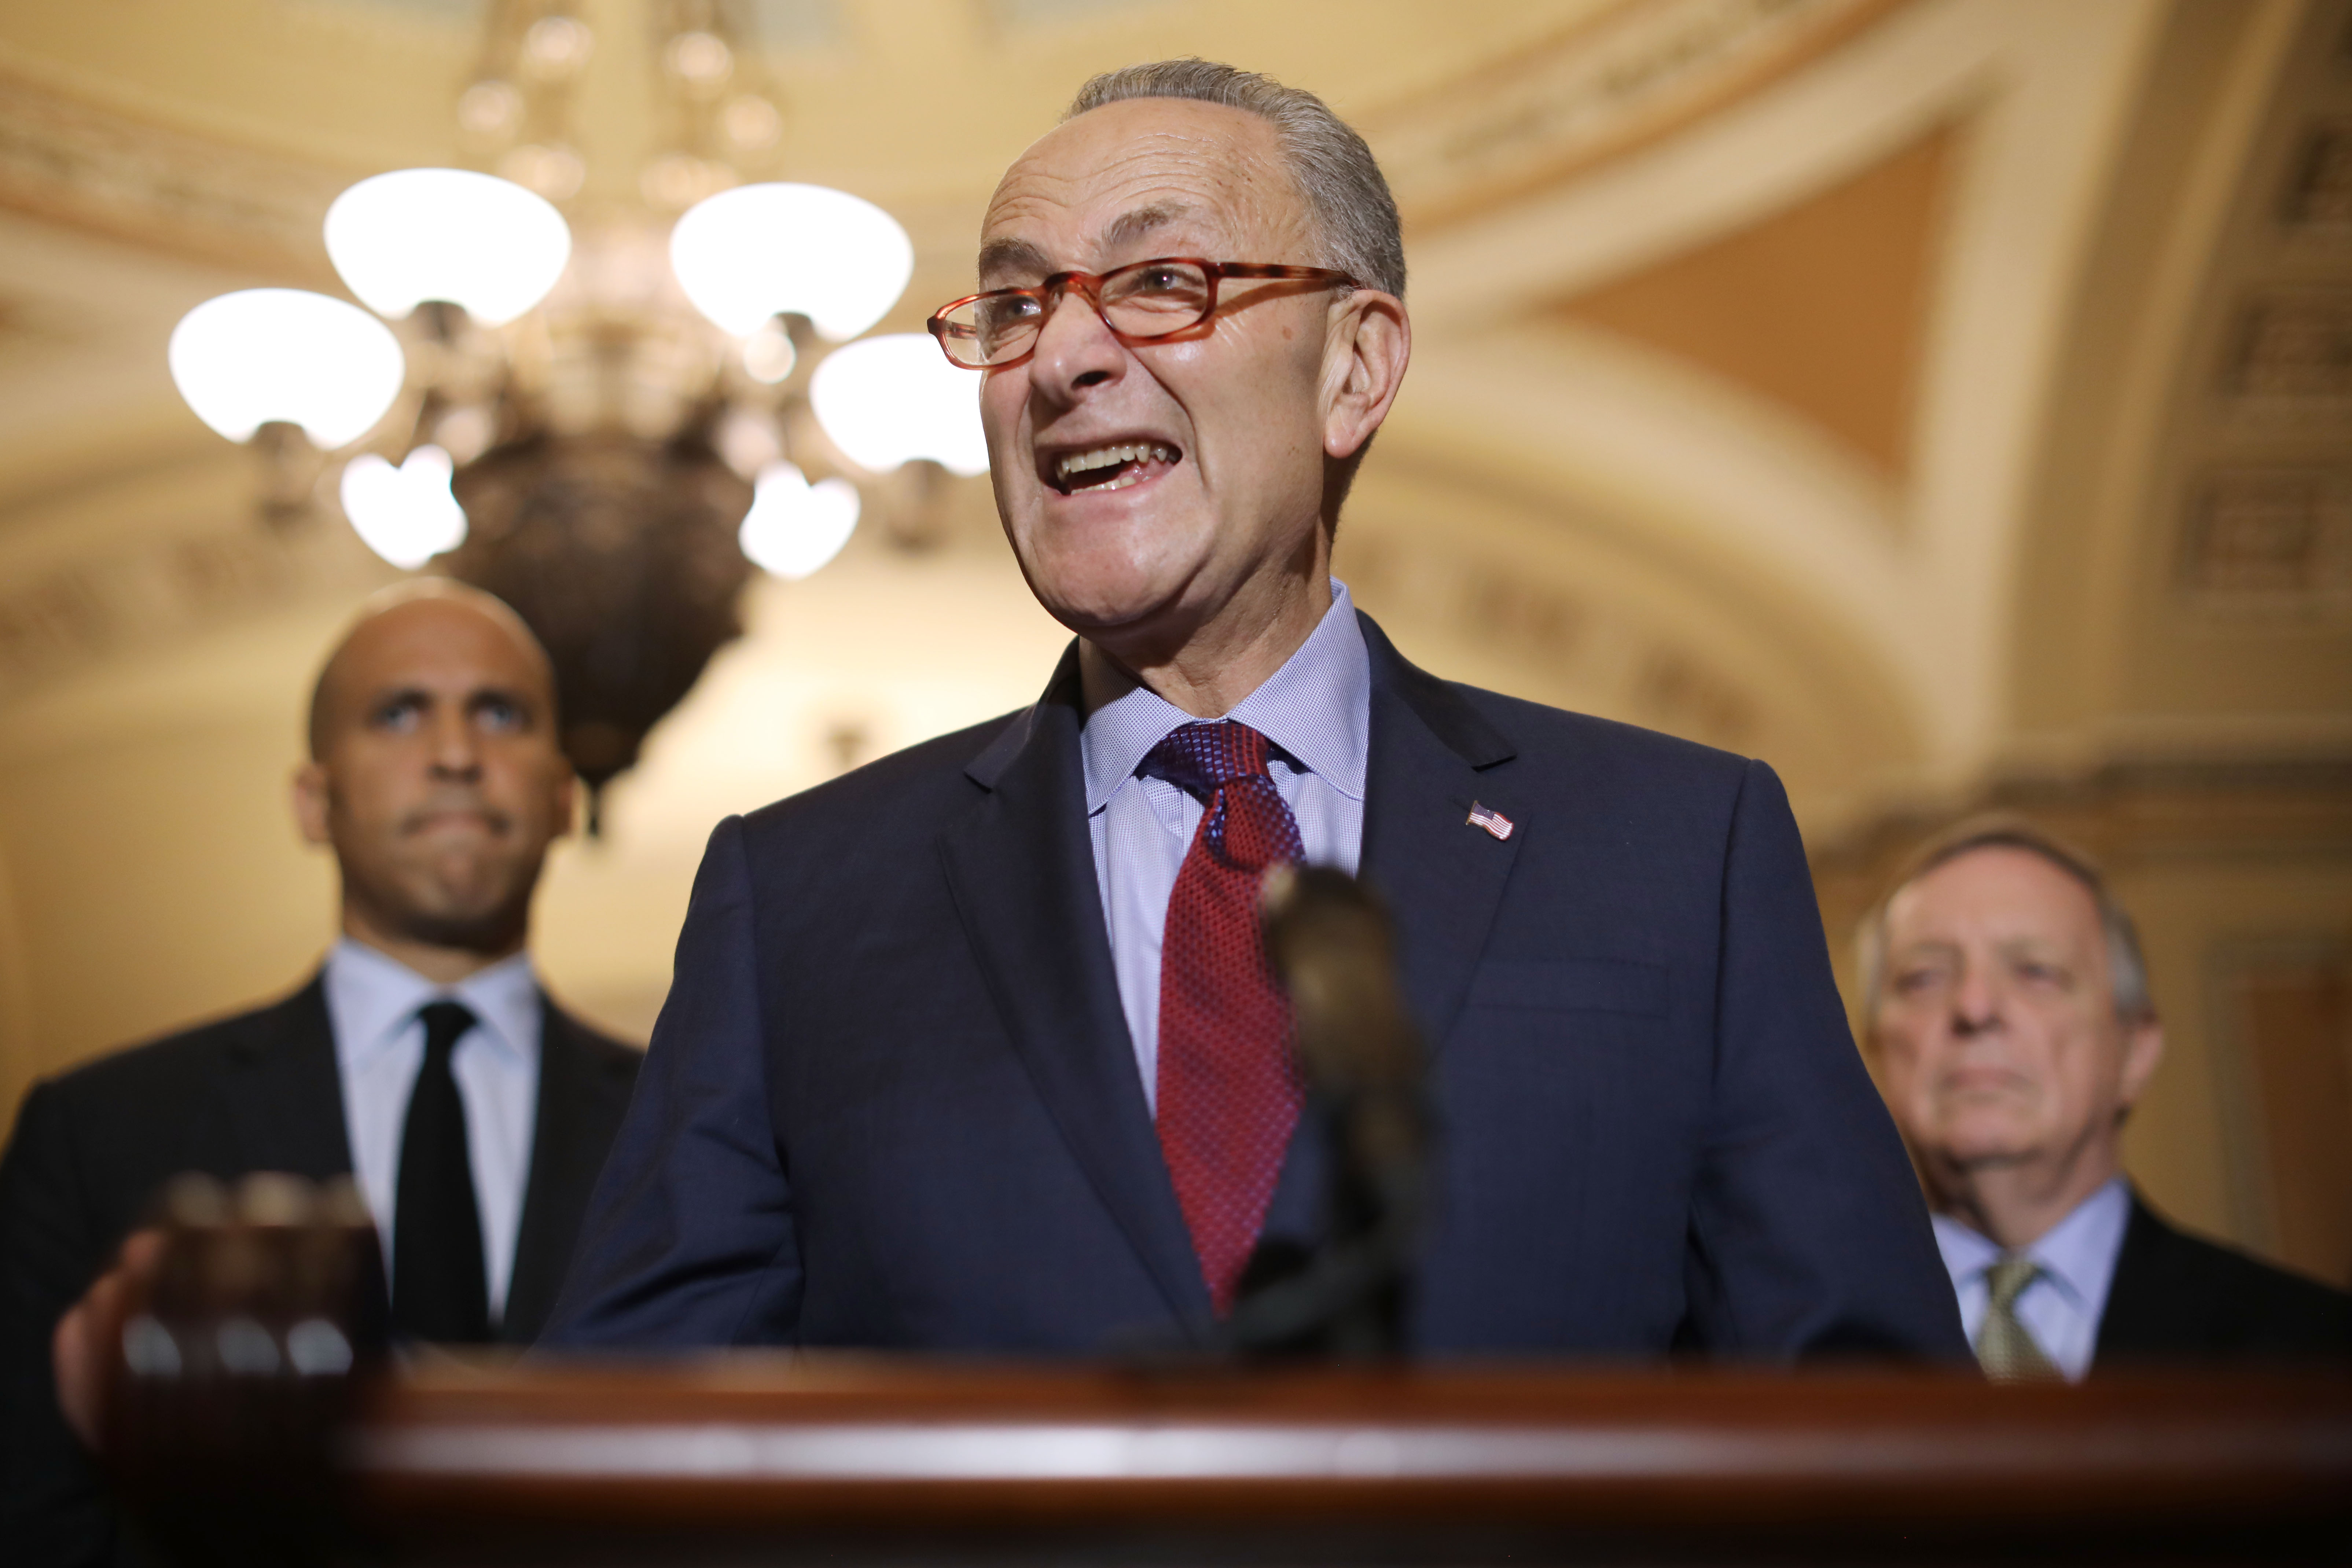 Senate Minority Leader Charles Schumer (D-NY) (C) talks to reporters with Sen. Cory Booker (D-NJ) (L) and Sen. Richard Durbin (D-IL) following the weekly Senate Democratic policy luncheon at the U.S. Capitol October 02, 2018 in Washington, DC. (Chip Somodevilla/Getty Images)